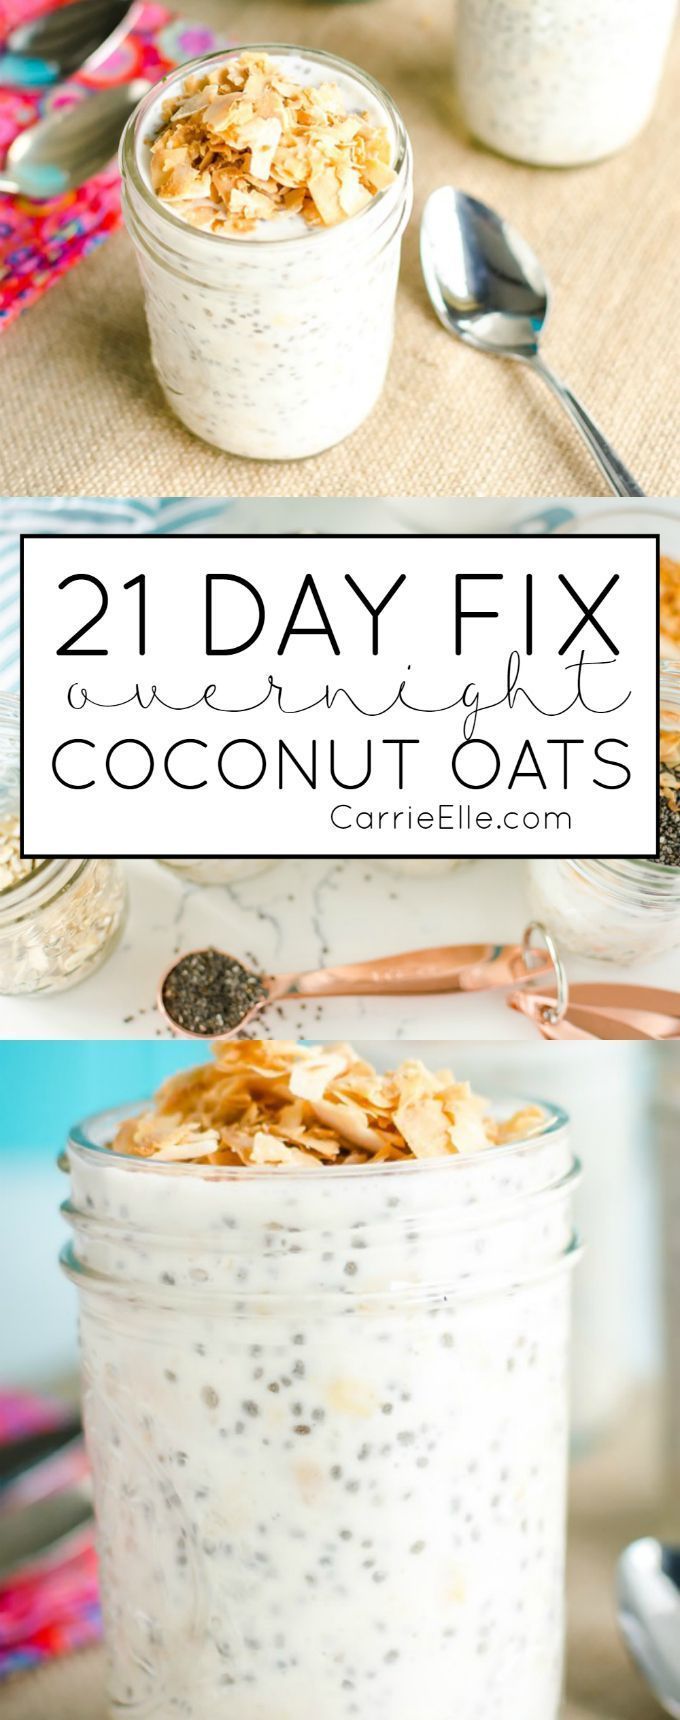 21 Day Fix Coconut Overnight Oats -   23 21 day fast
 ideas